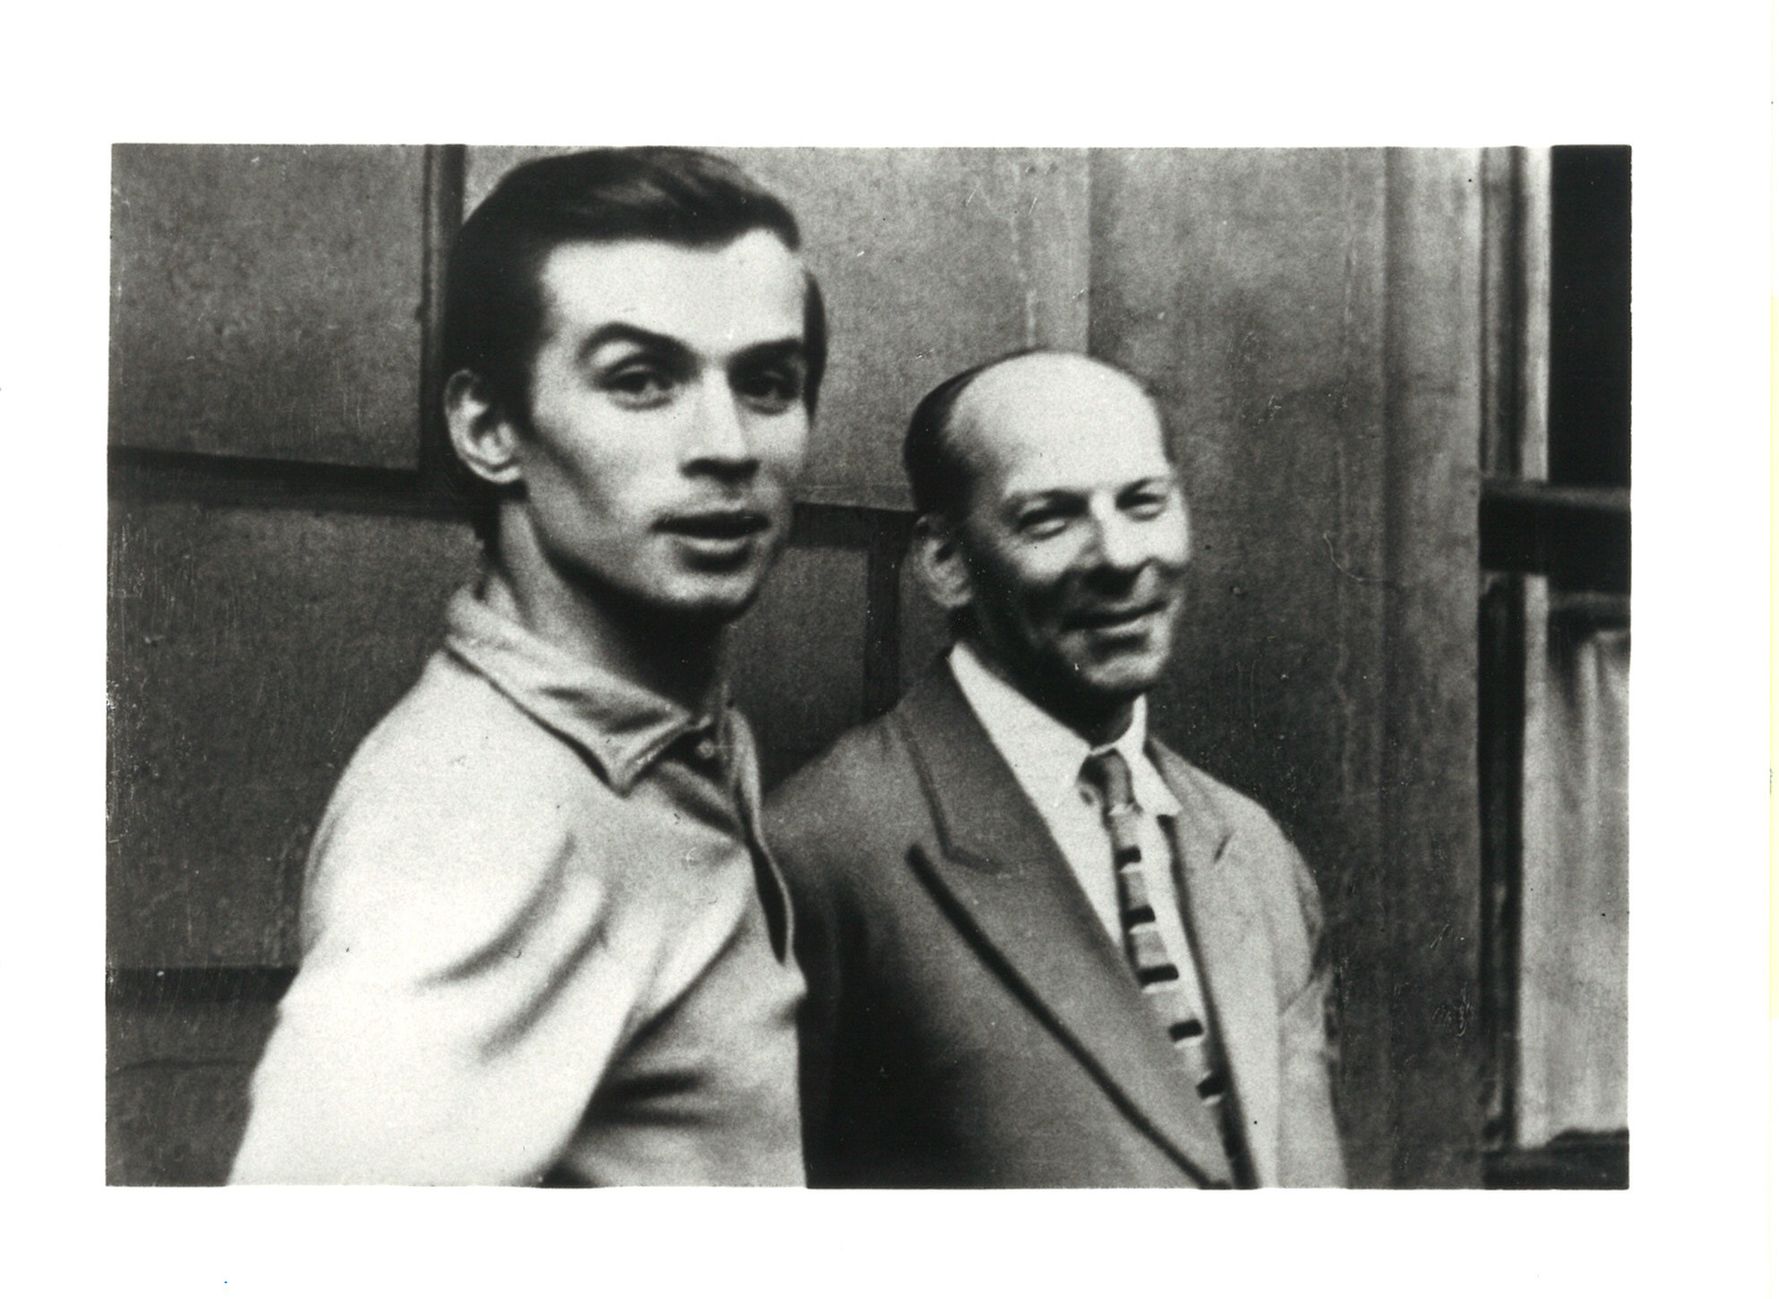 A black and white photograph of a young Rudolf Nureyev and his teacher, Alexander Pushkin, here smiling and wearing a suit and tie.